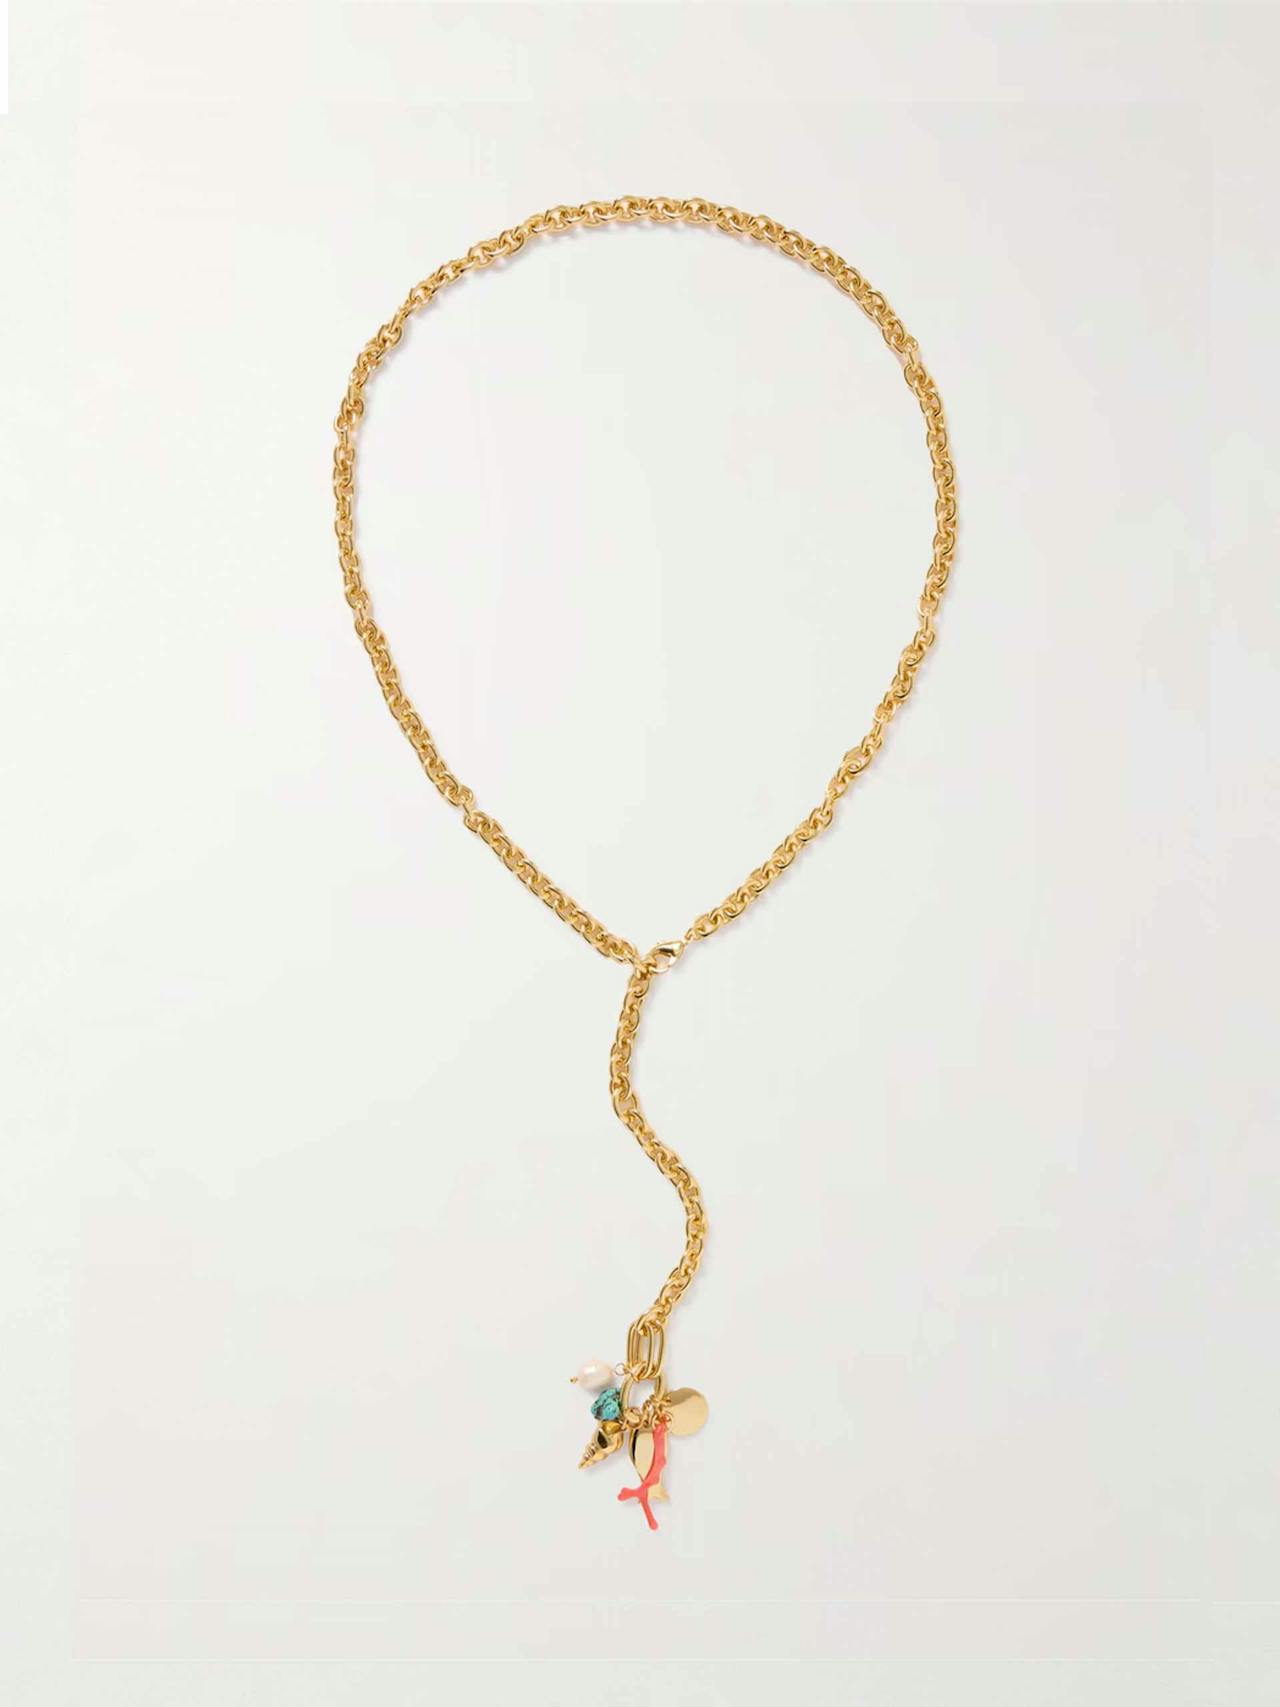 The Apertivo gold-tone, enamel, turquoise and pearl necklace